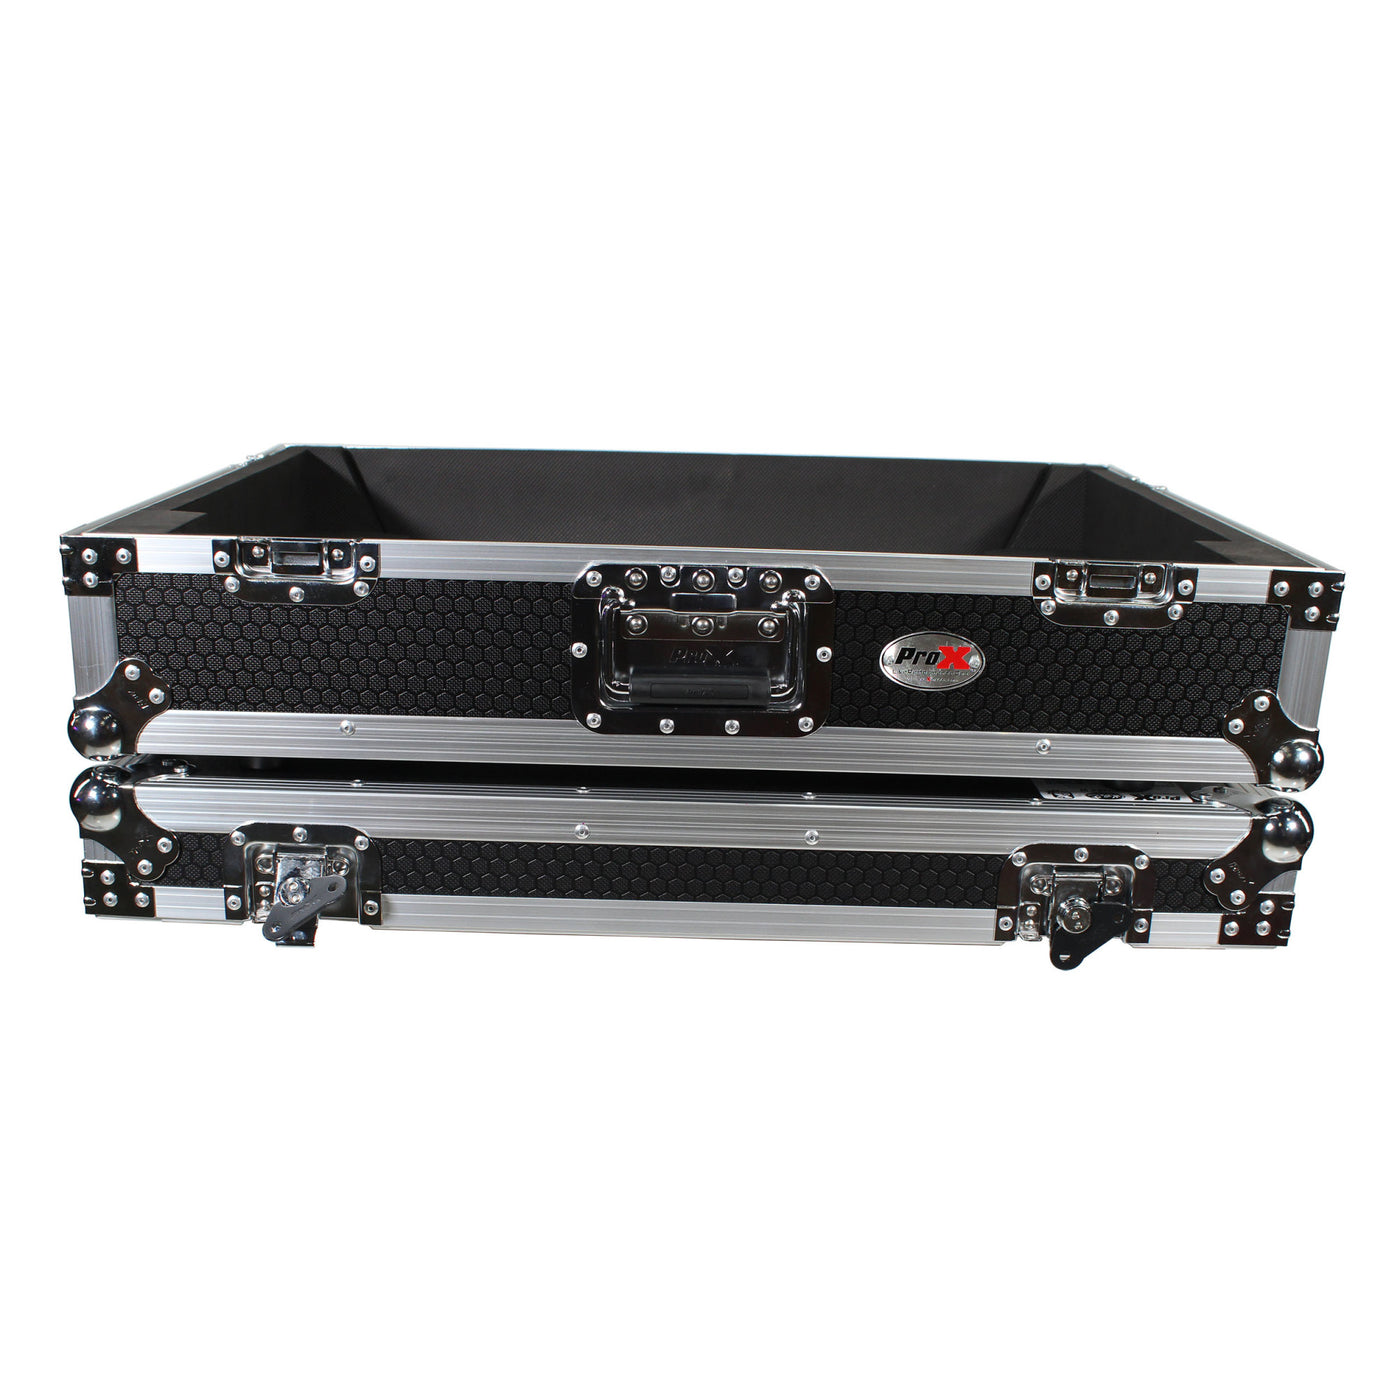 ProX XS-PRIME4W ATA-300 Style Flight Case, For Denon PRIME 4 DJ Controller, With 1U Rack Space and Wheels, Pro Audio Equipment Storage, Silver on Black